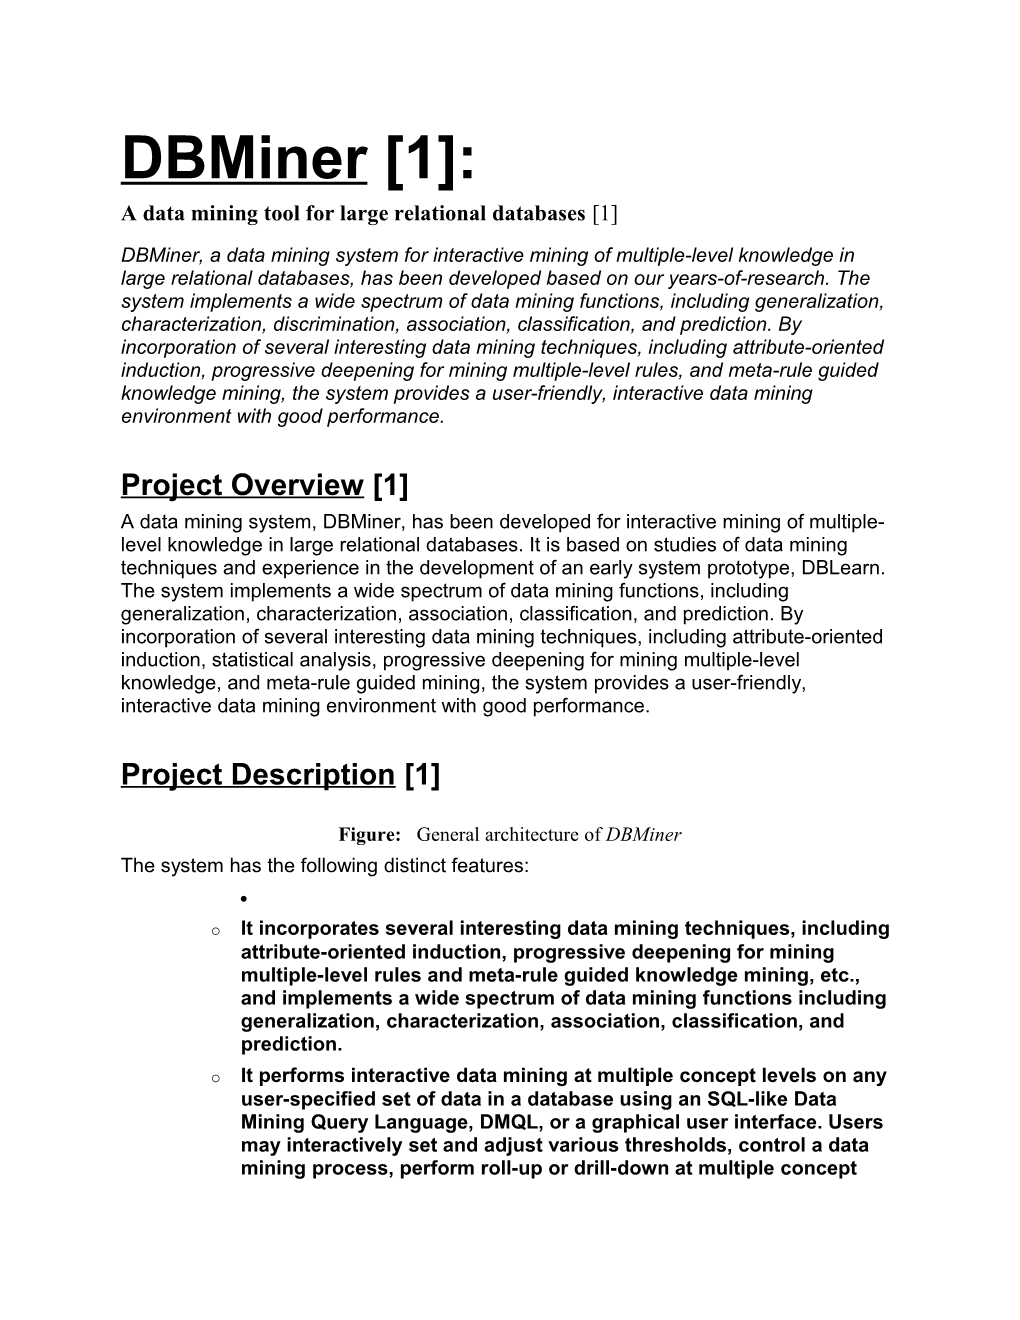 Dbminer, a Data Mining System for Interactive Mining of Multiple-Level Knowledge in Large